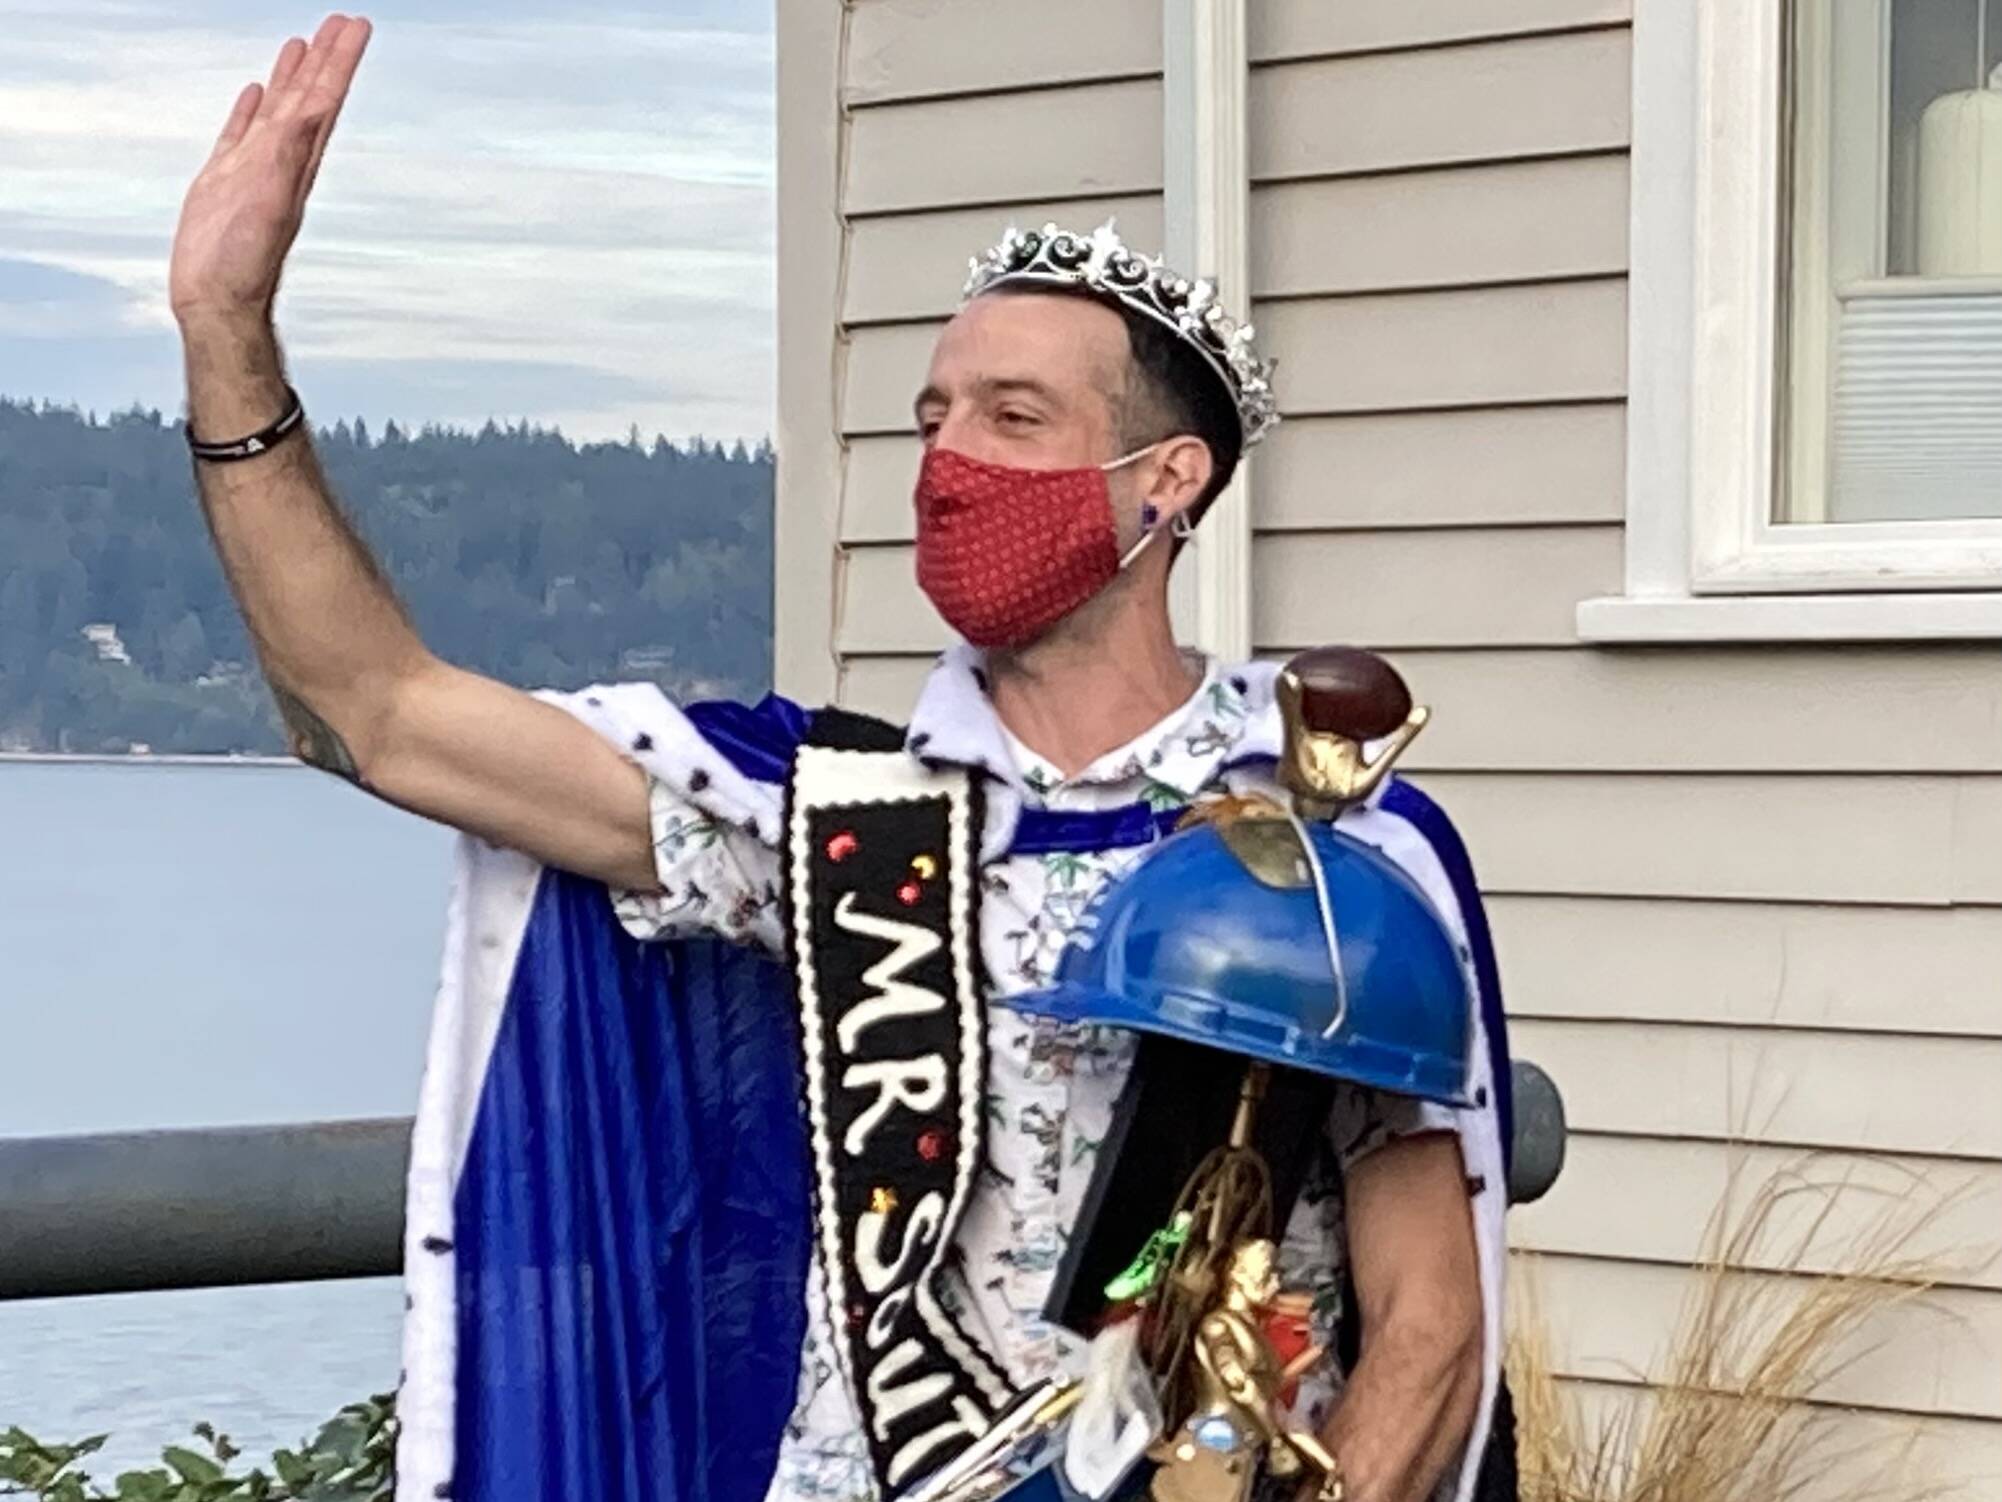 Photo provided
Newly crowned Mr. South Whidbey 2021, Jasper Hein.